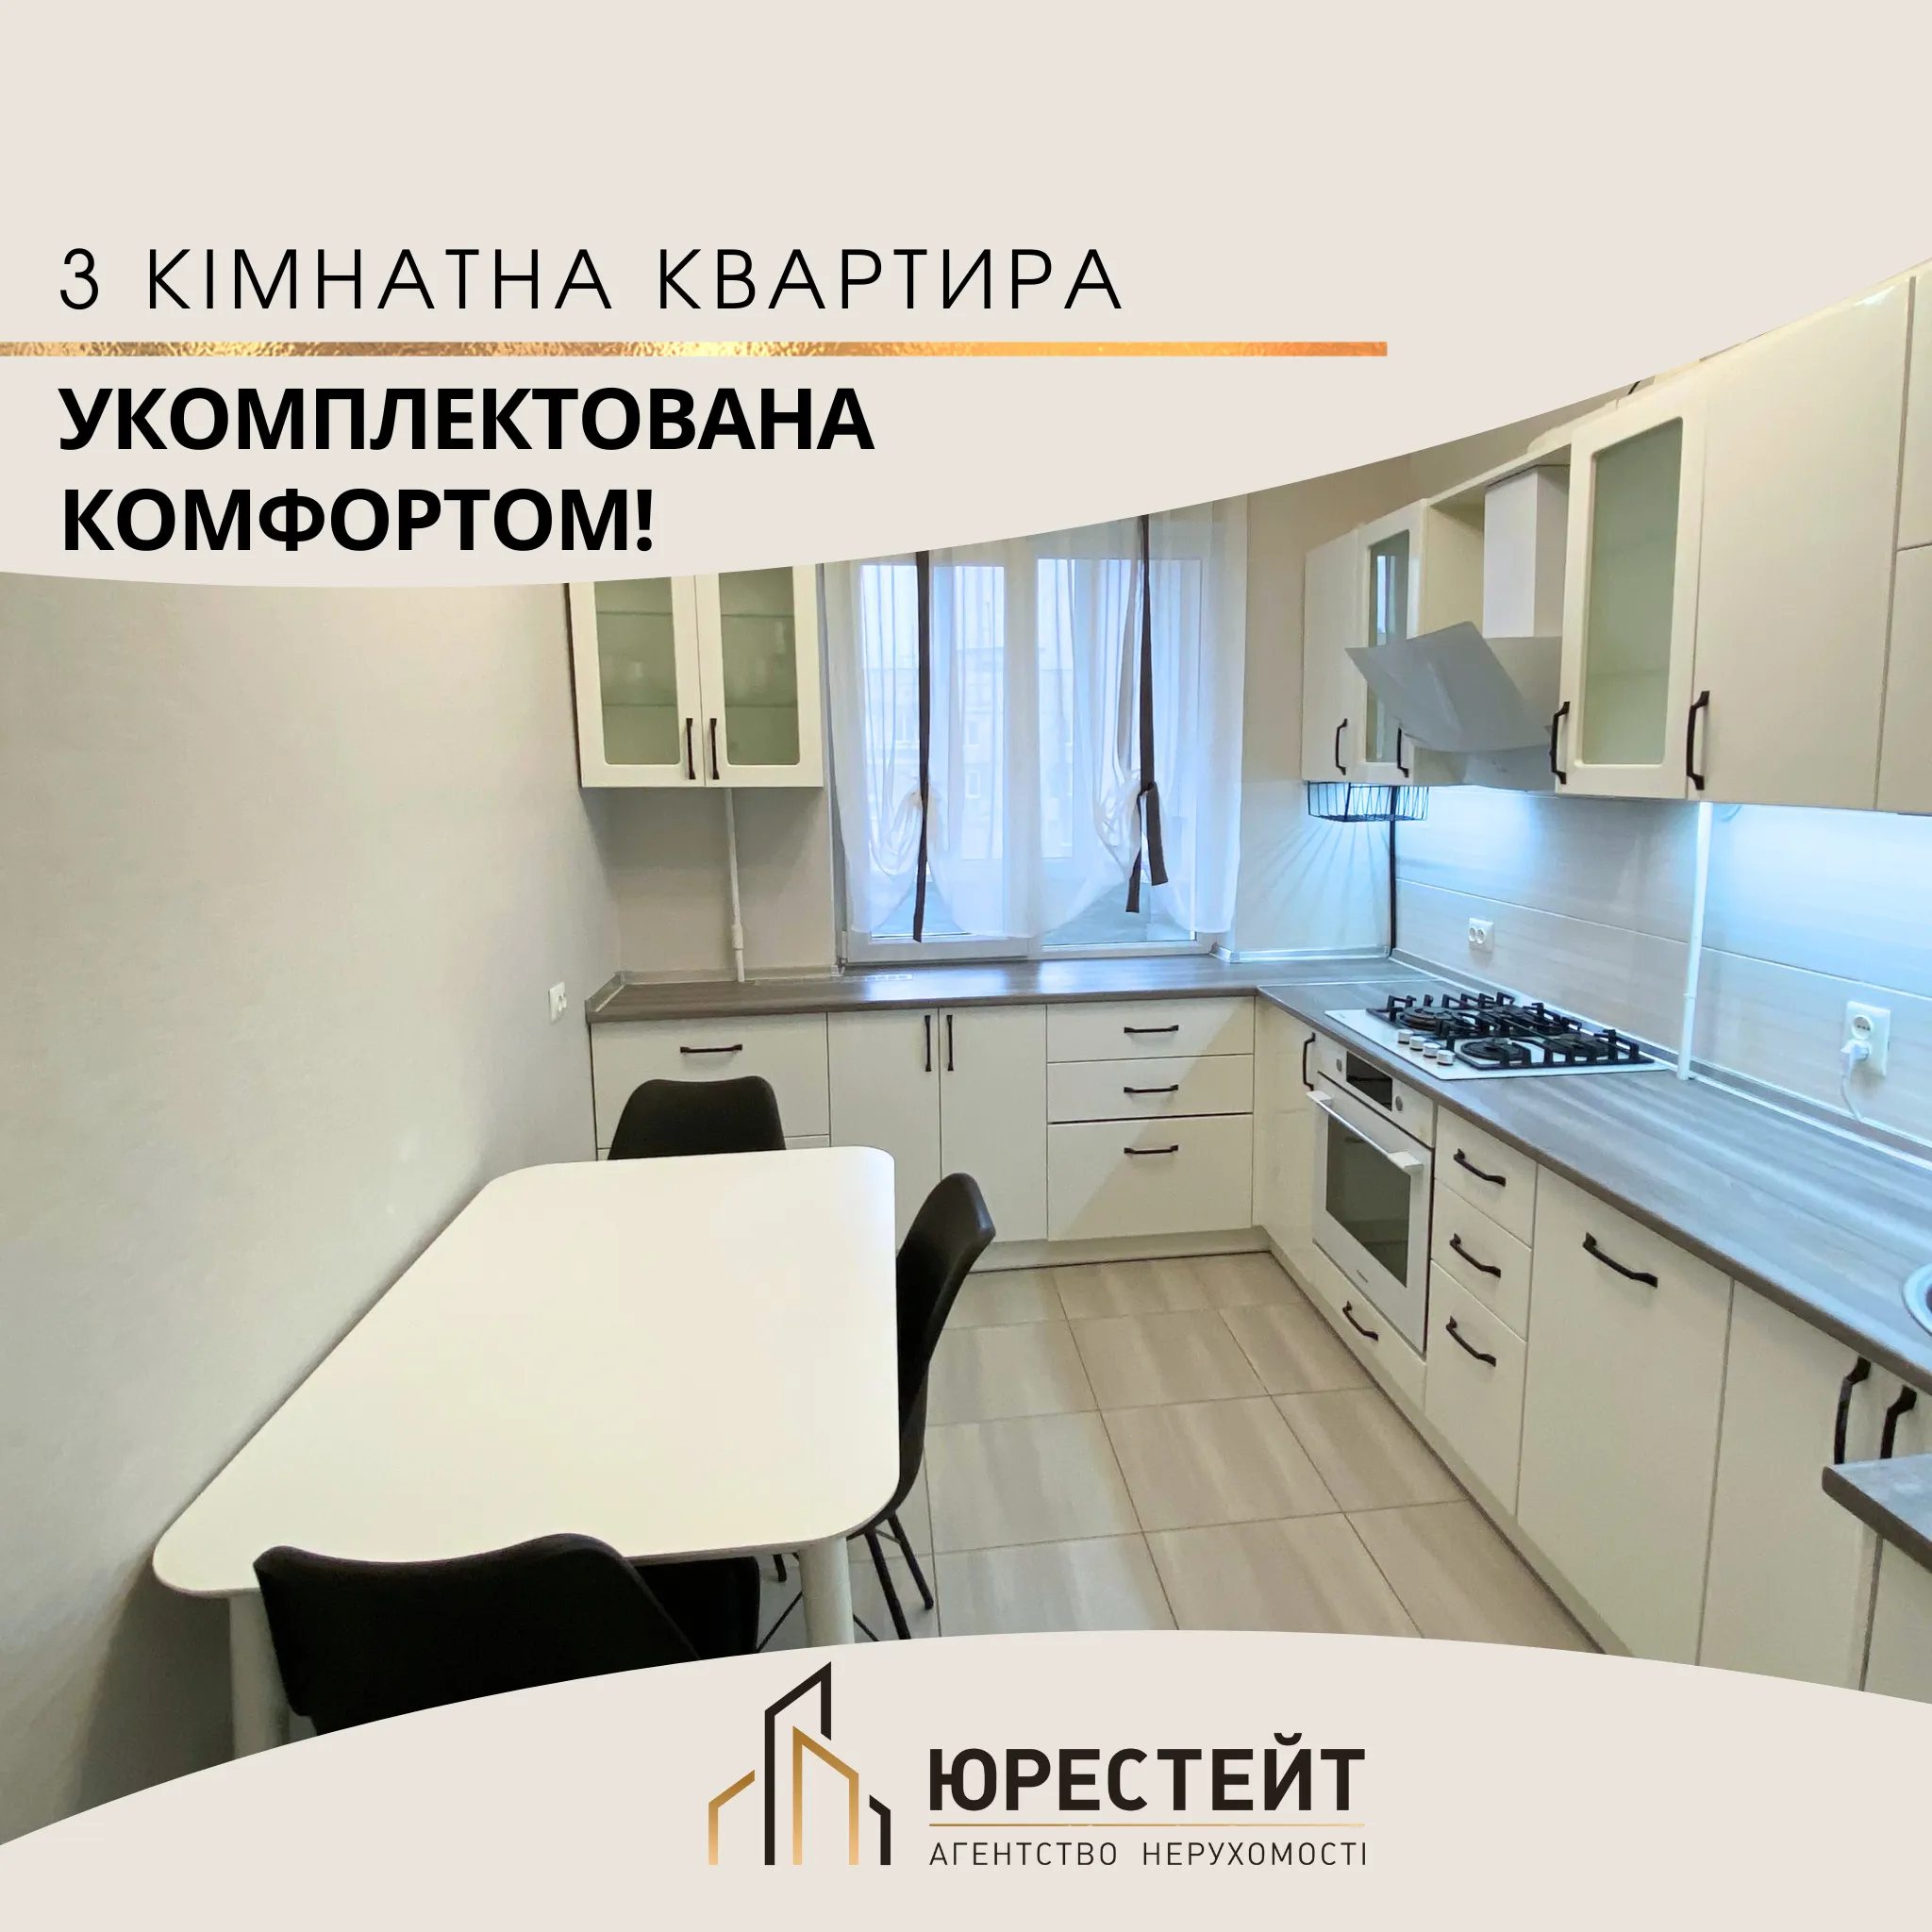 Apartments for sale. 3 rooms, 65 m², 8th floor/9 floors. 45, Solnechnyy, Kryvyy Rih. 